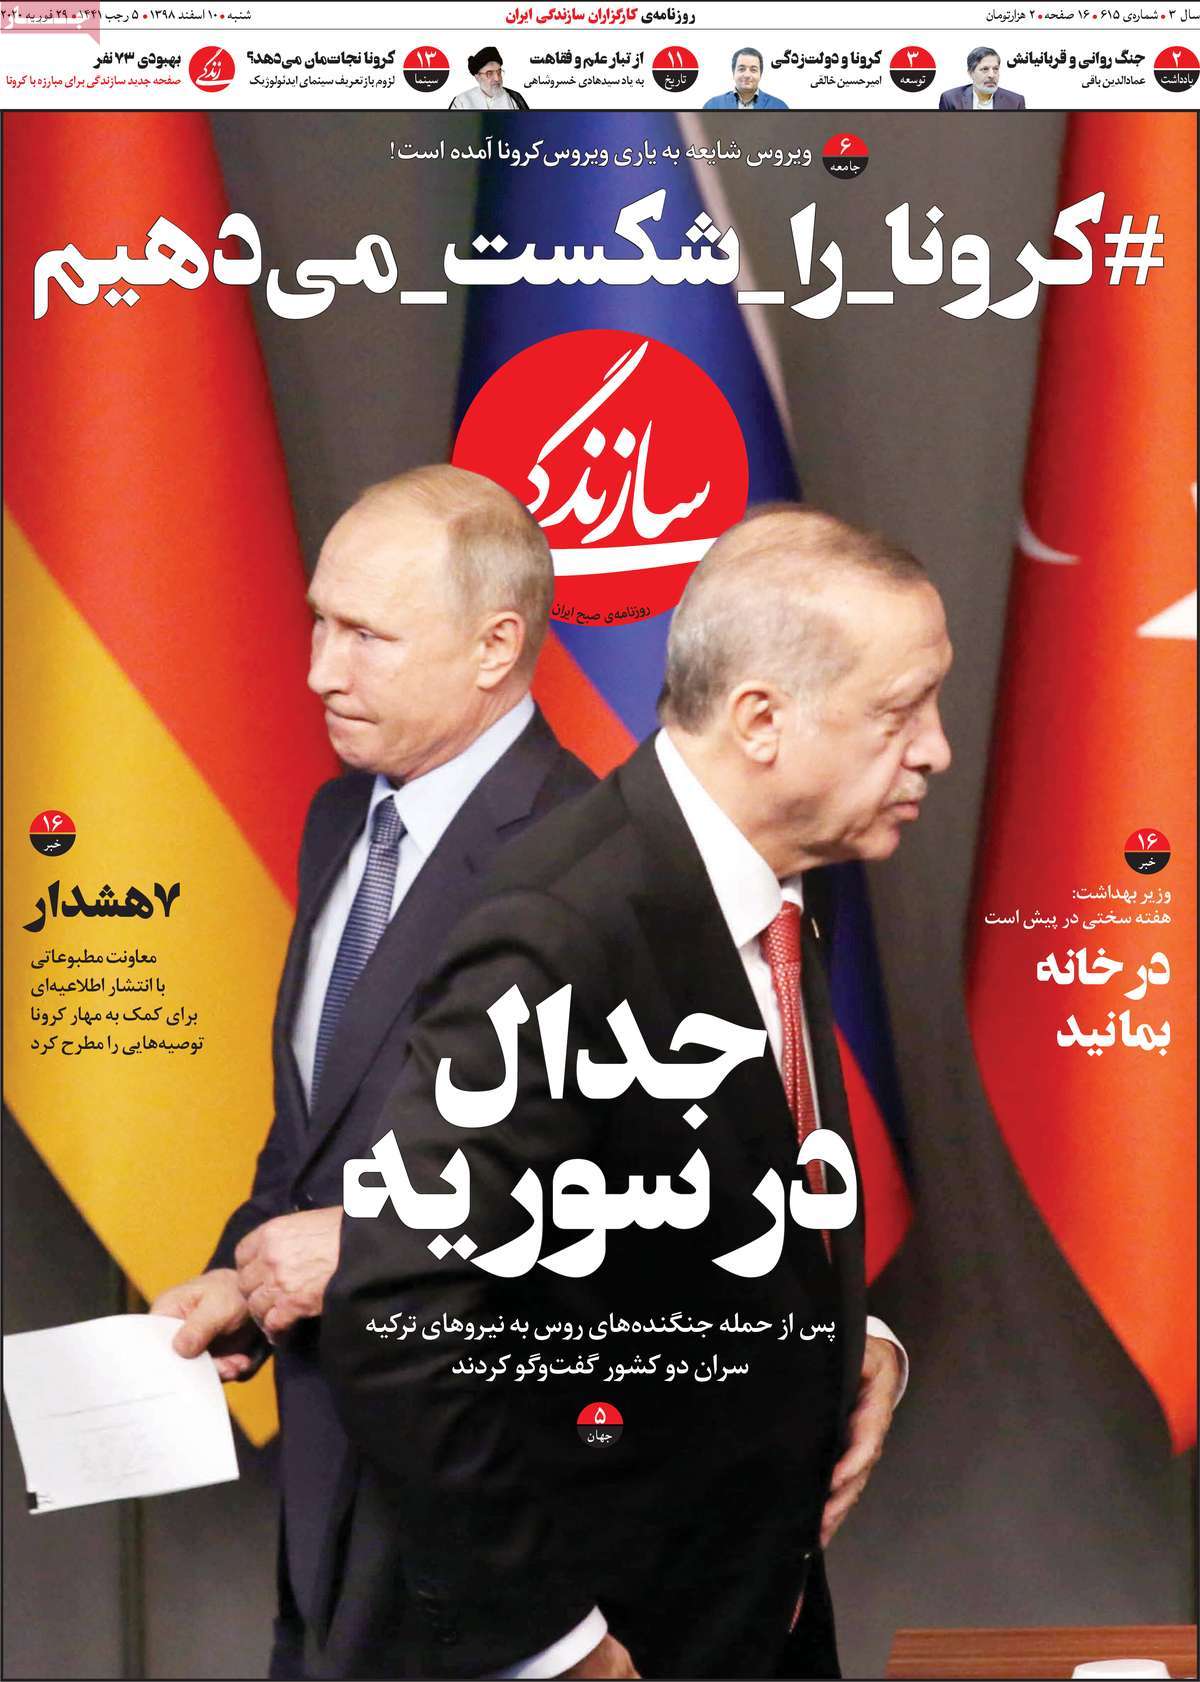 A Look at Iranian Newspaper Front Pages on February 29